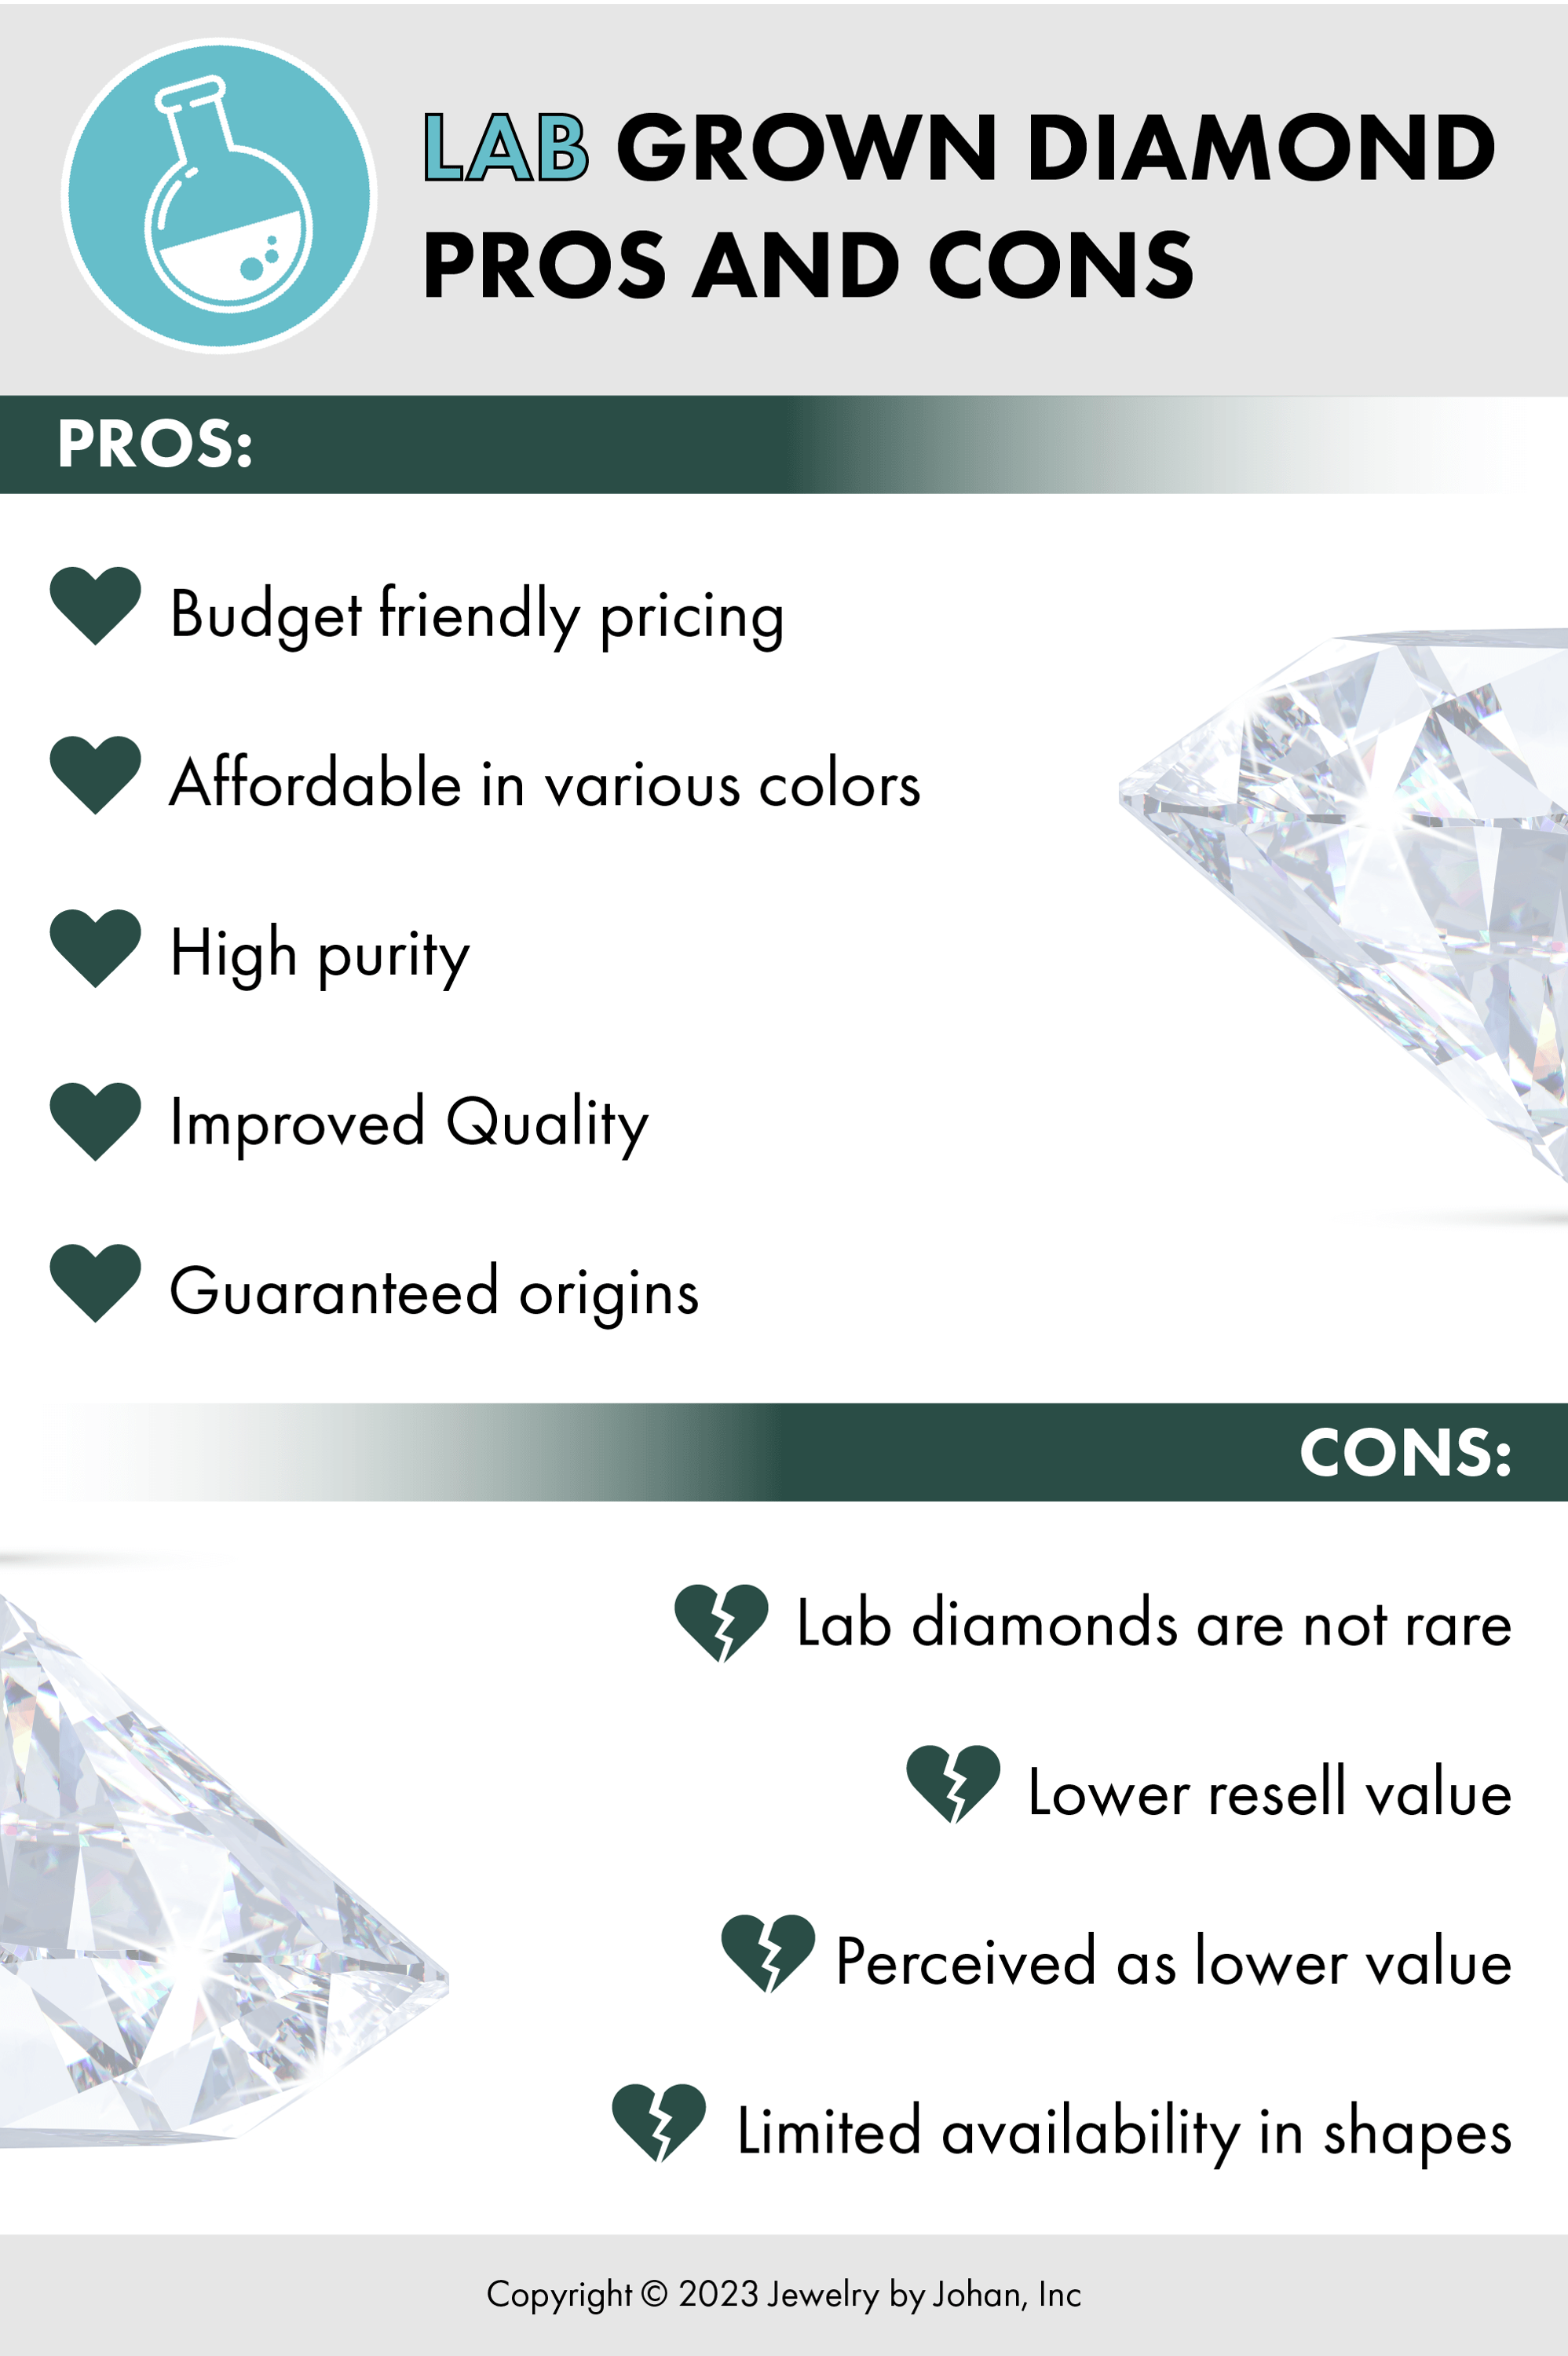 Pros and Cons of Lab-Grown Diamonds